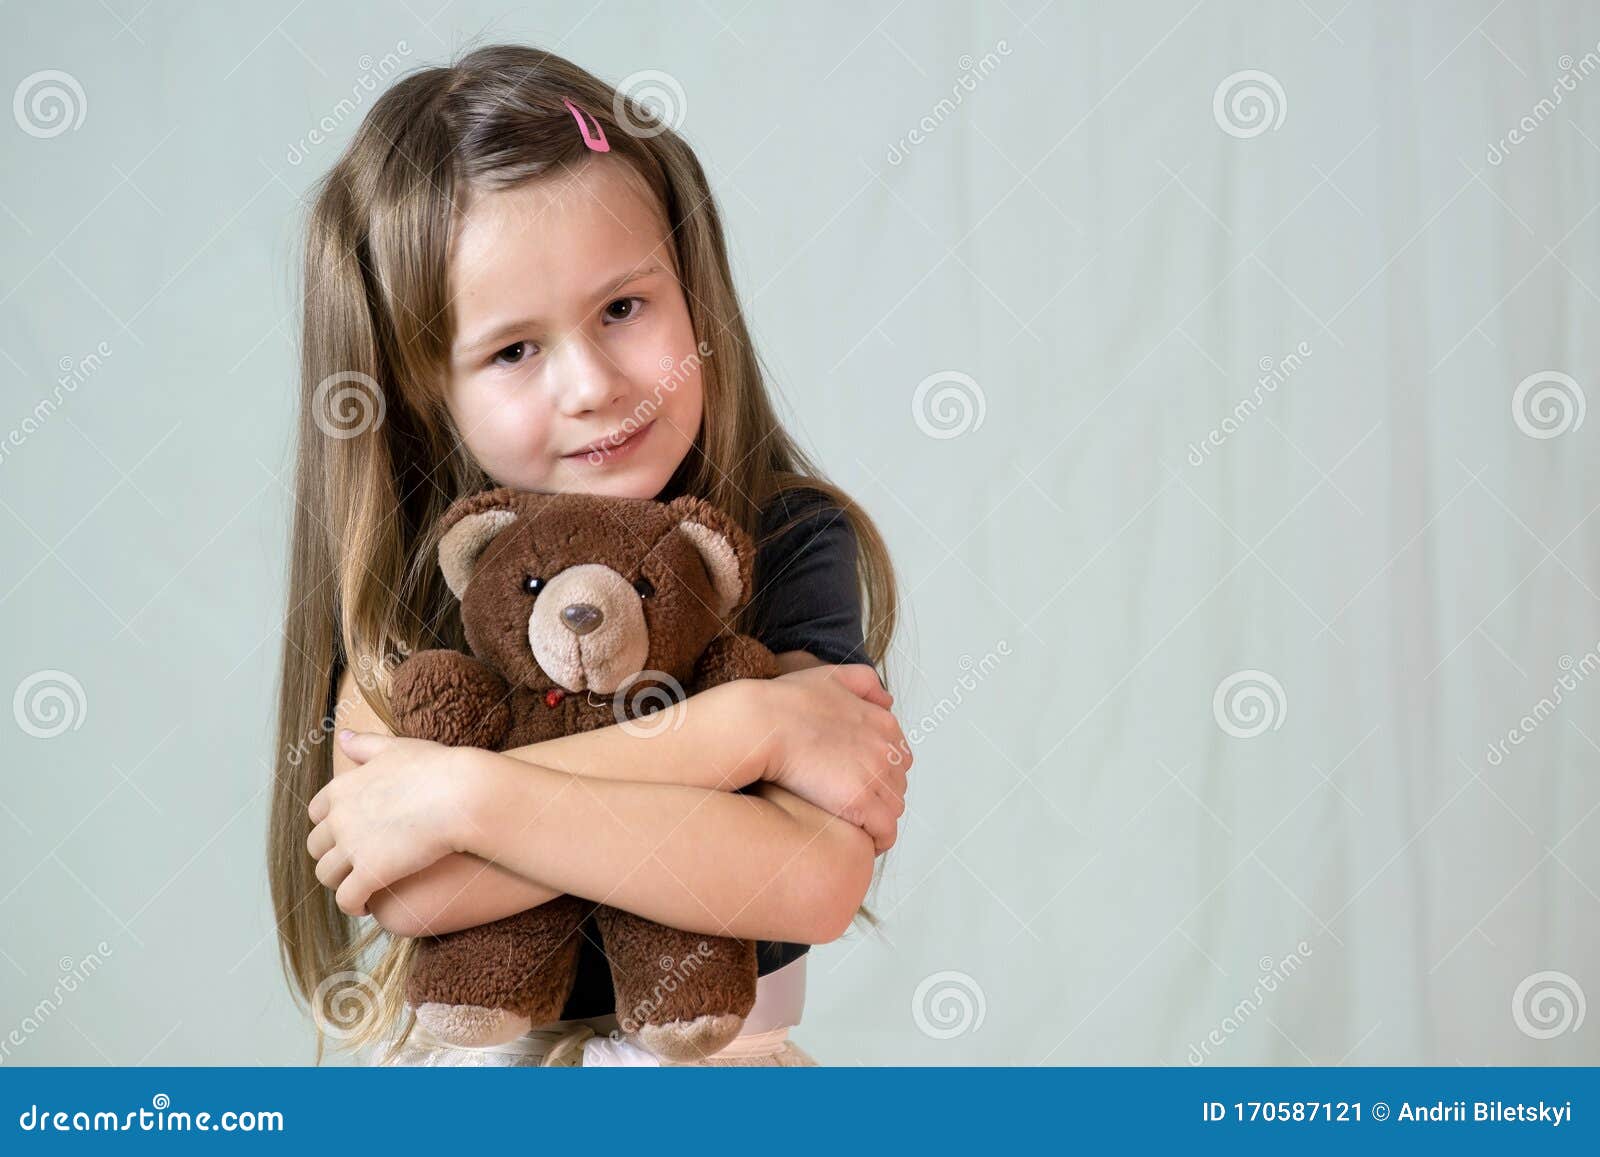 Pretty Child Girl Playing with Her Teddy Bear Toy Stock Image - Image ...